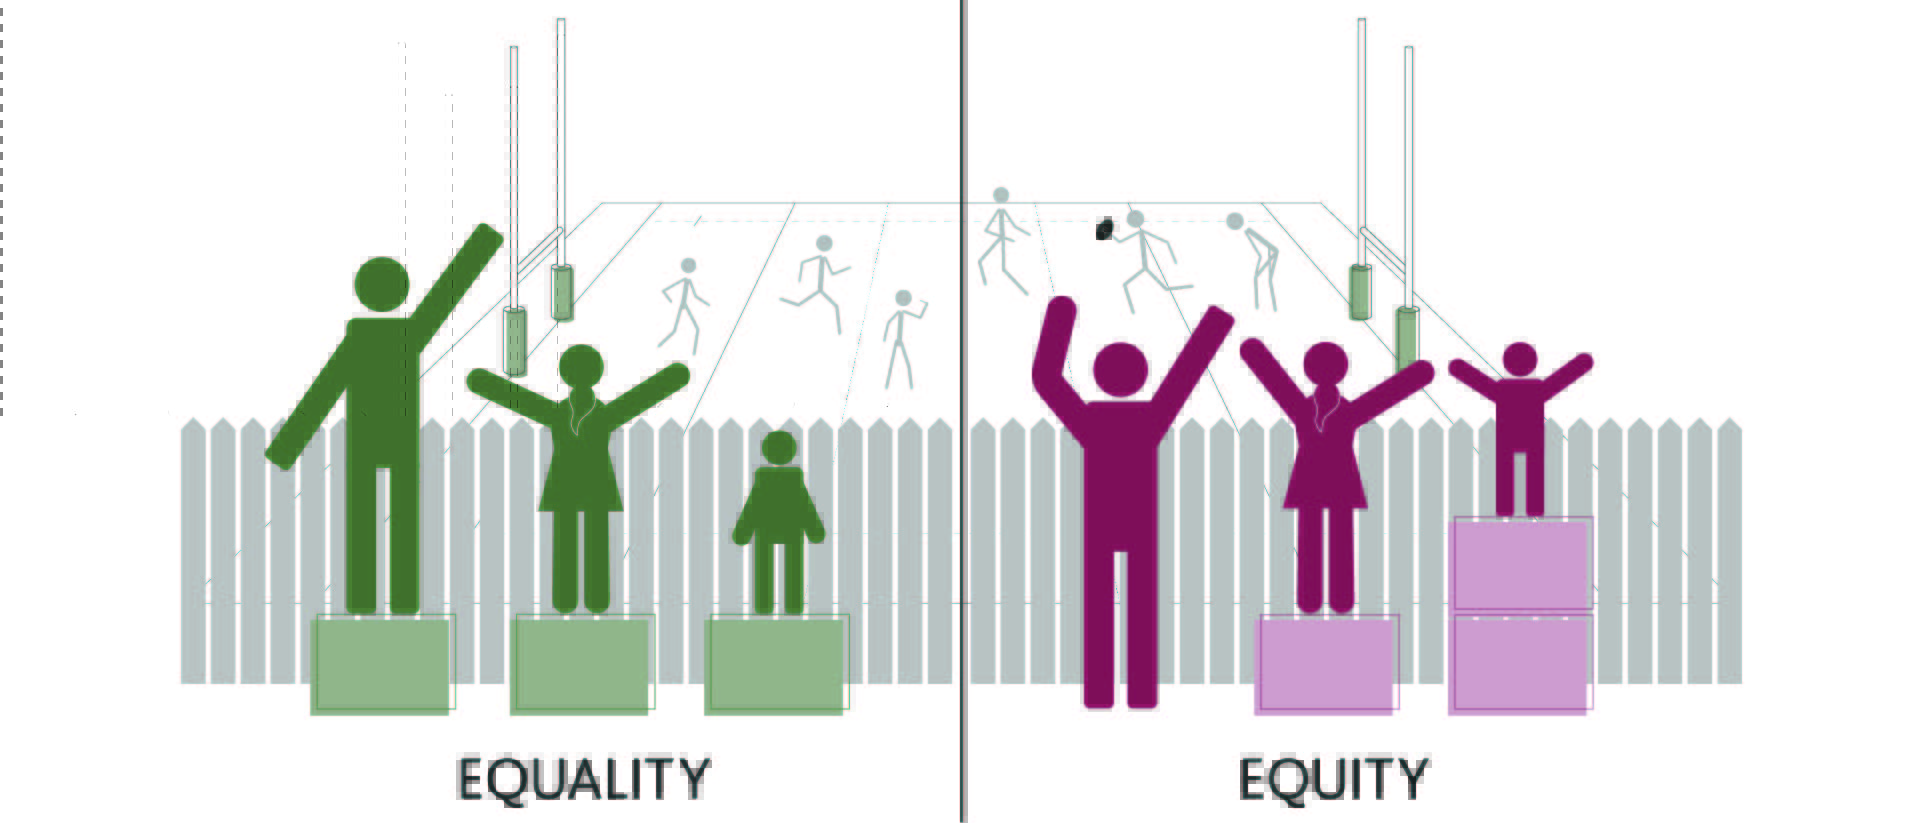 An illustration of the difference between equality and equity showing people standing on platforms to watch a game over a fence.